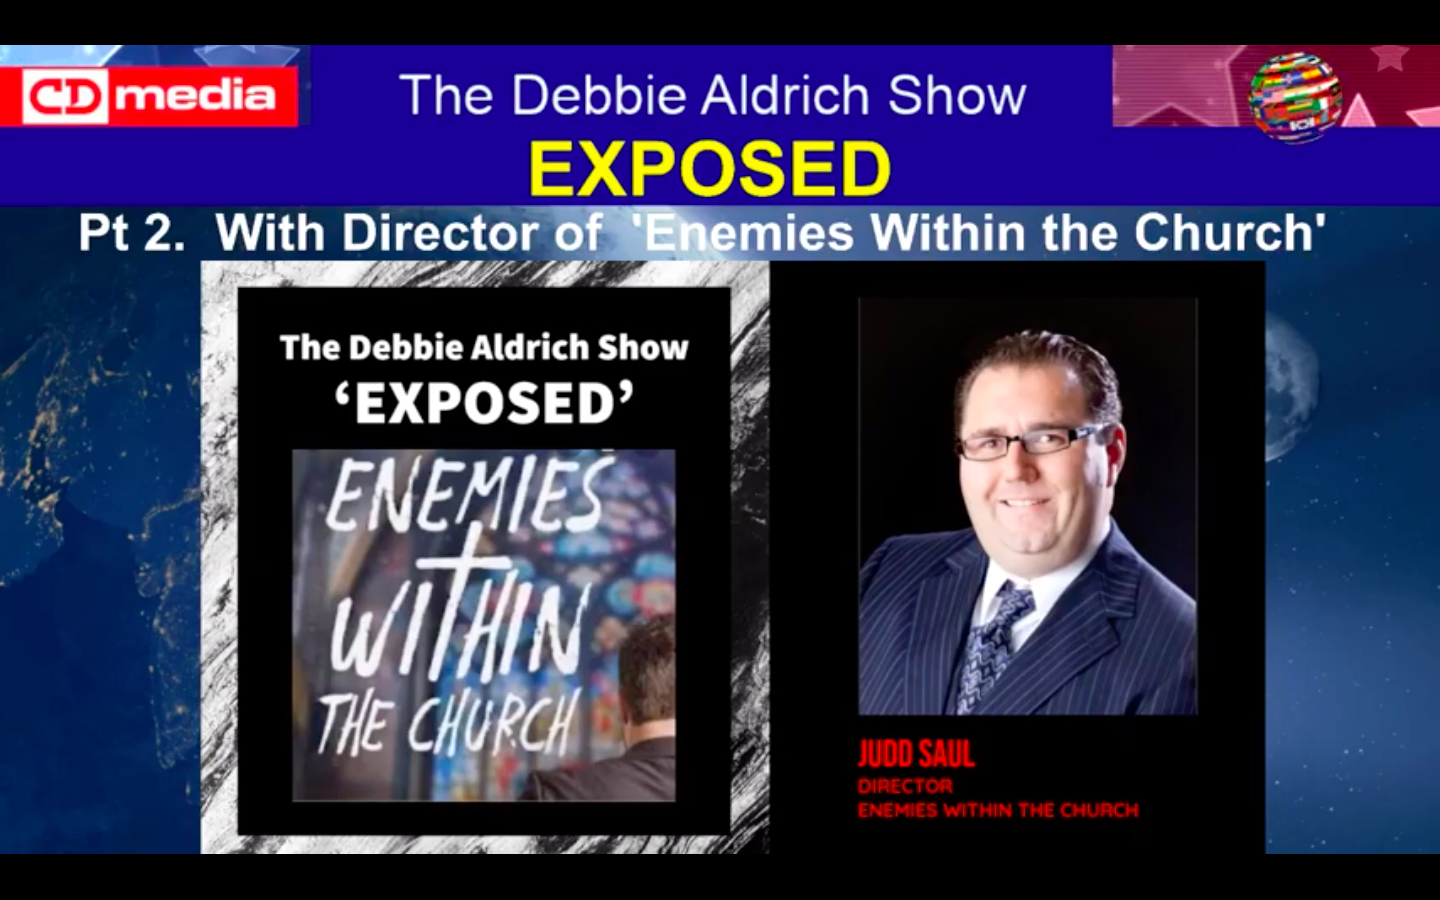 Judd Saul, Film Director, Discusses His Upcoming Movie “Enemies Within The Church” With Debbie Aldrich (Part 2)